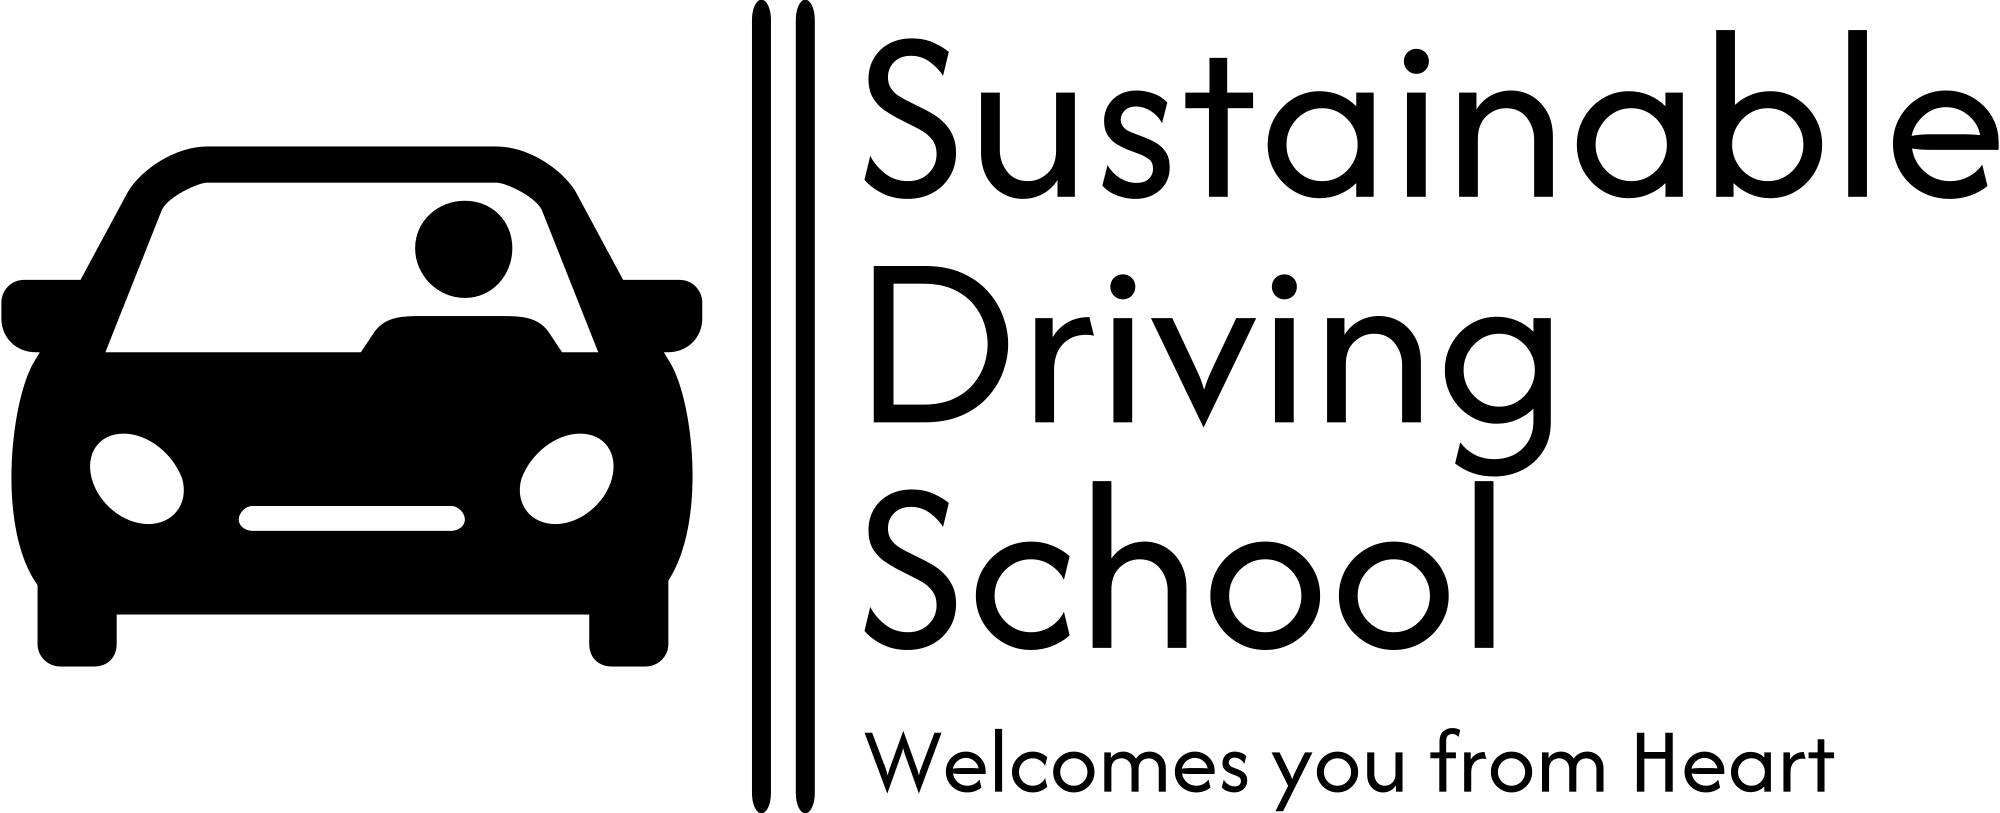 Sustainable Driving School